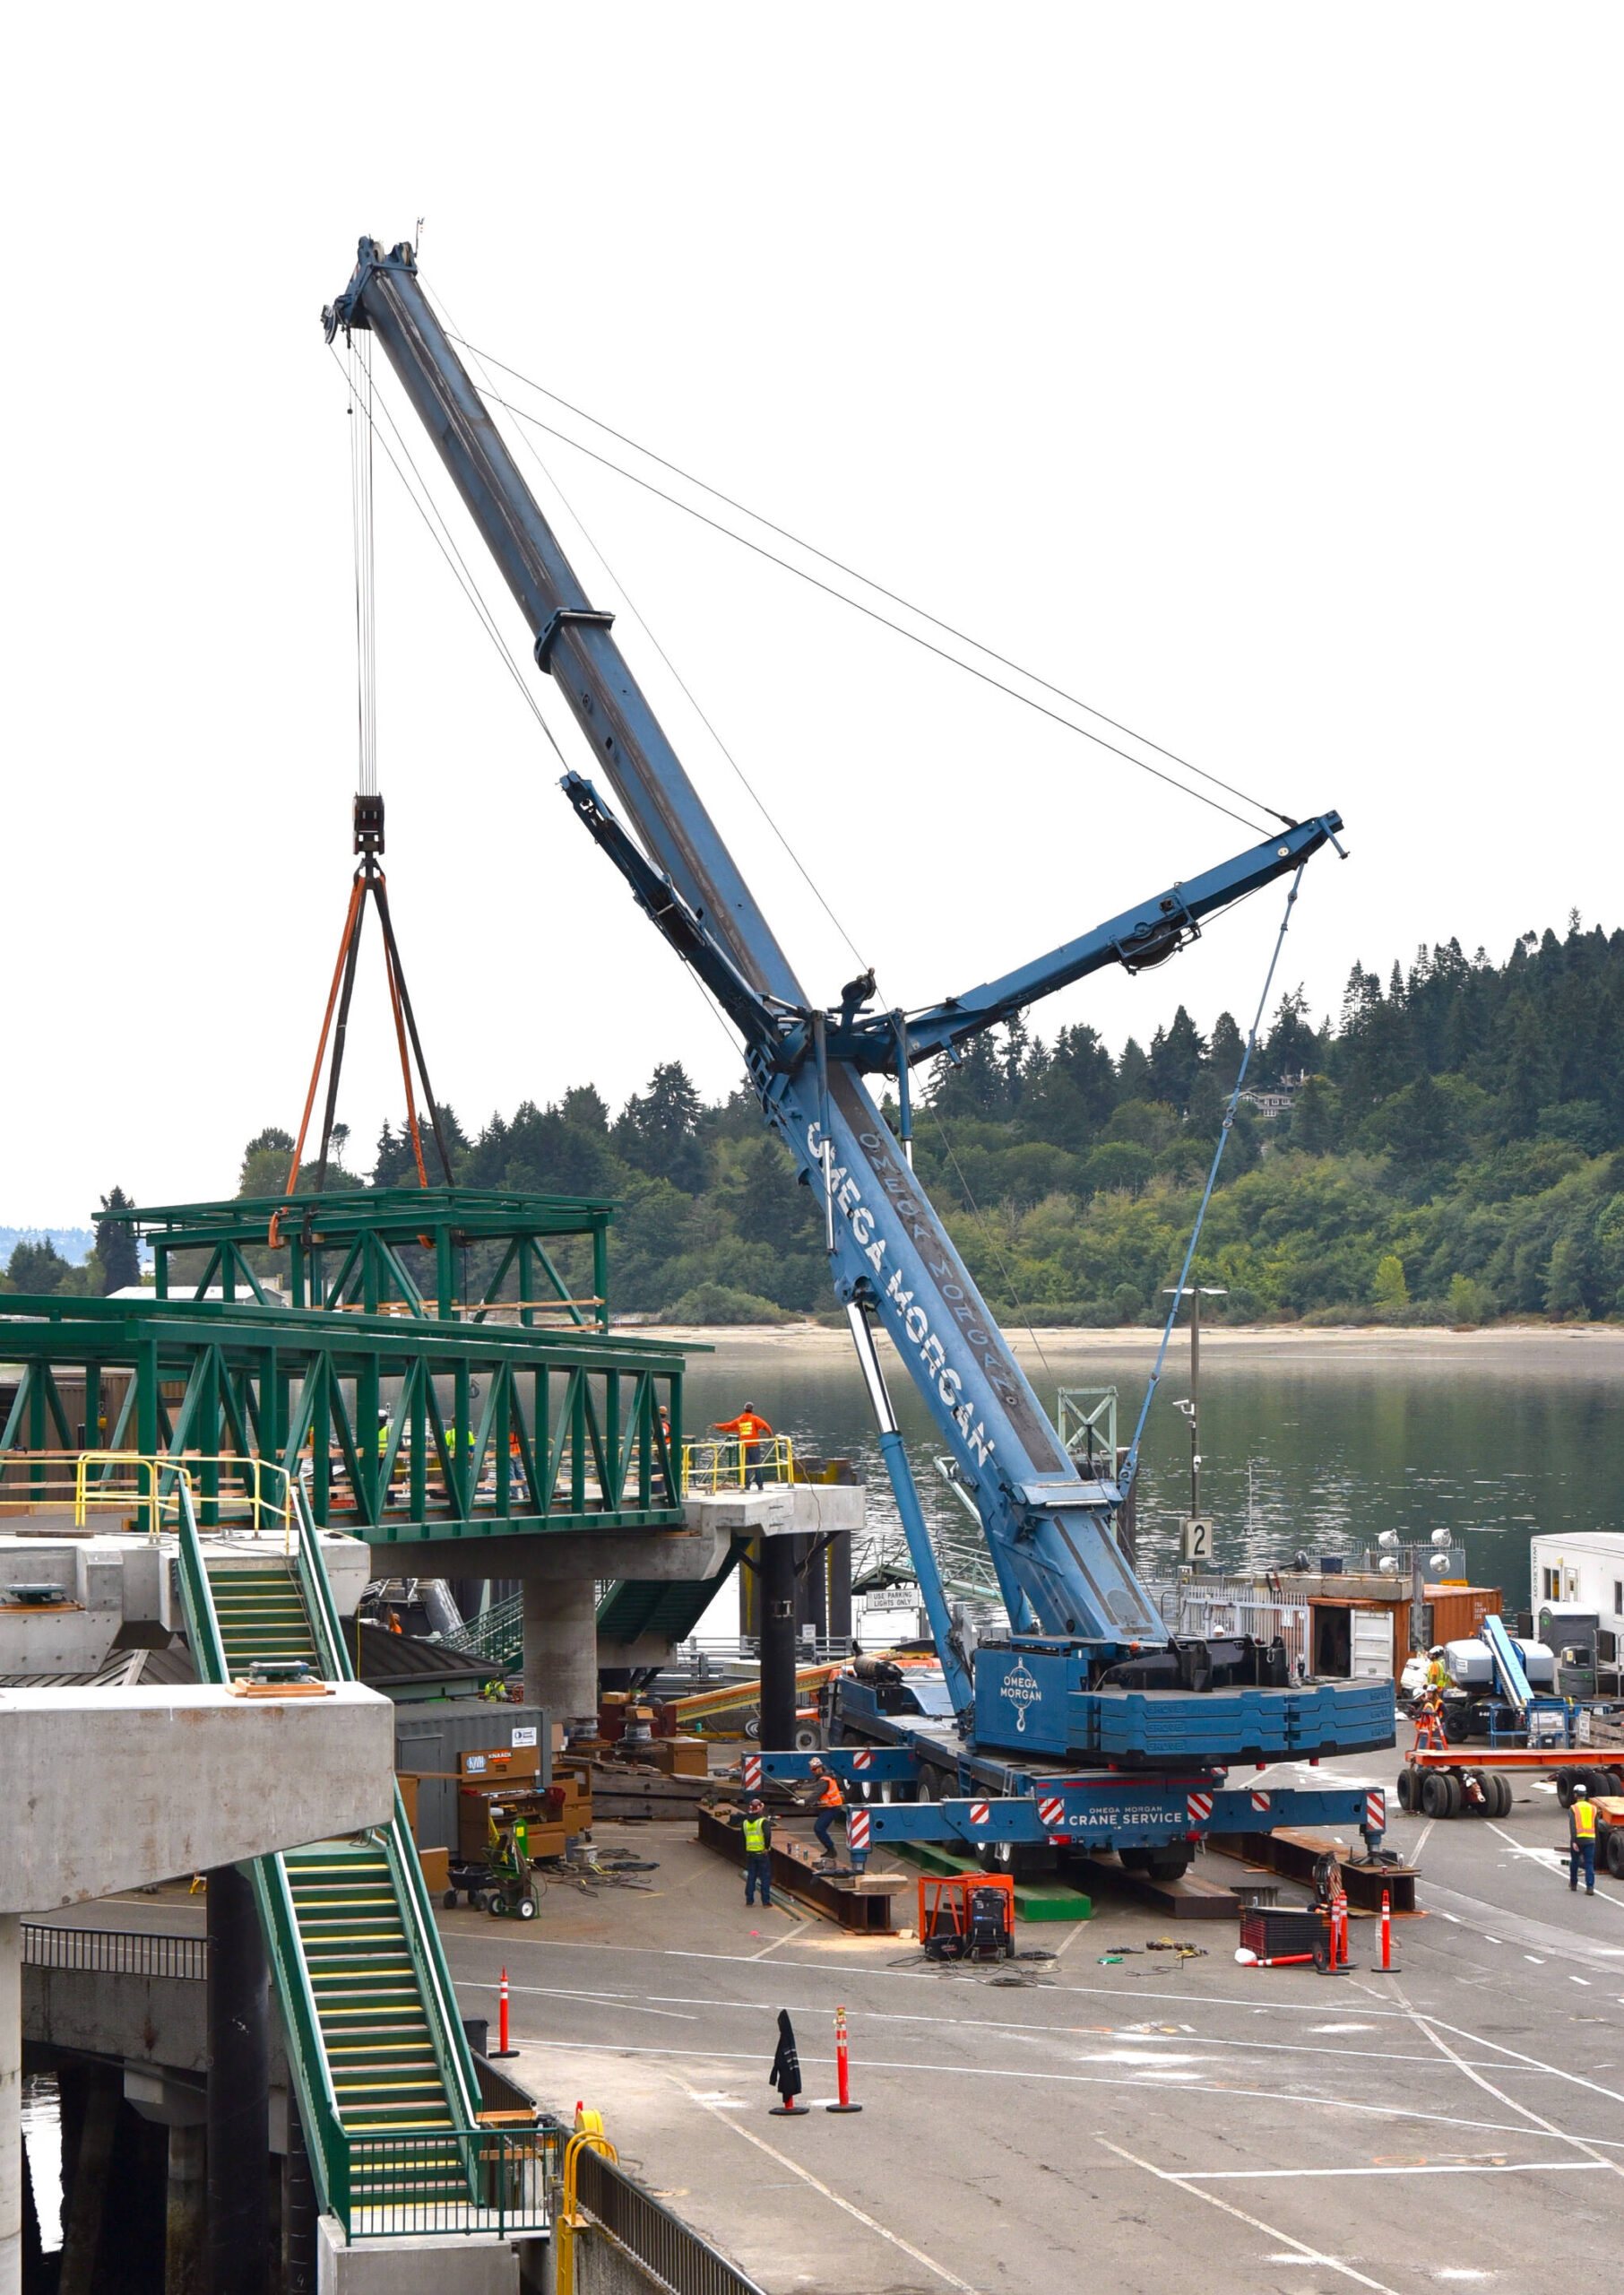 Nancy Treder/Kitsap News Group
Construction work continues at the Bainbridge Island ferry terminal where a second walkway span was set into place the morning of Sept. 11.